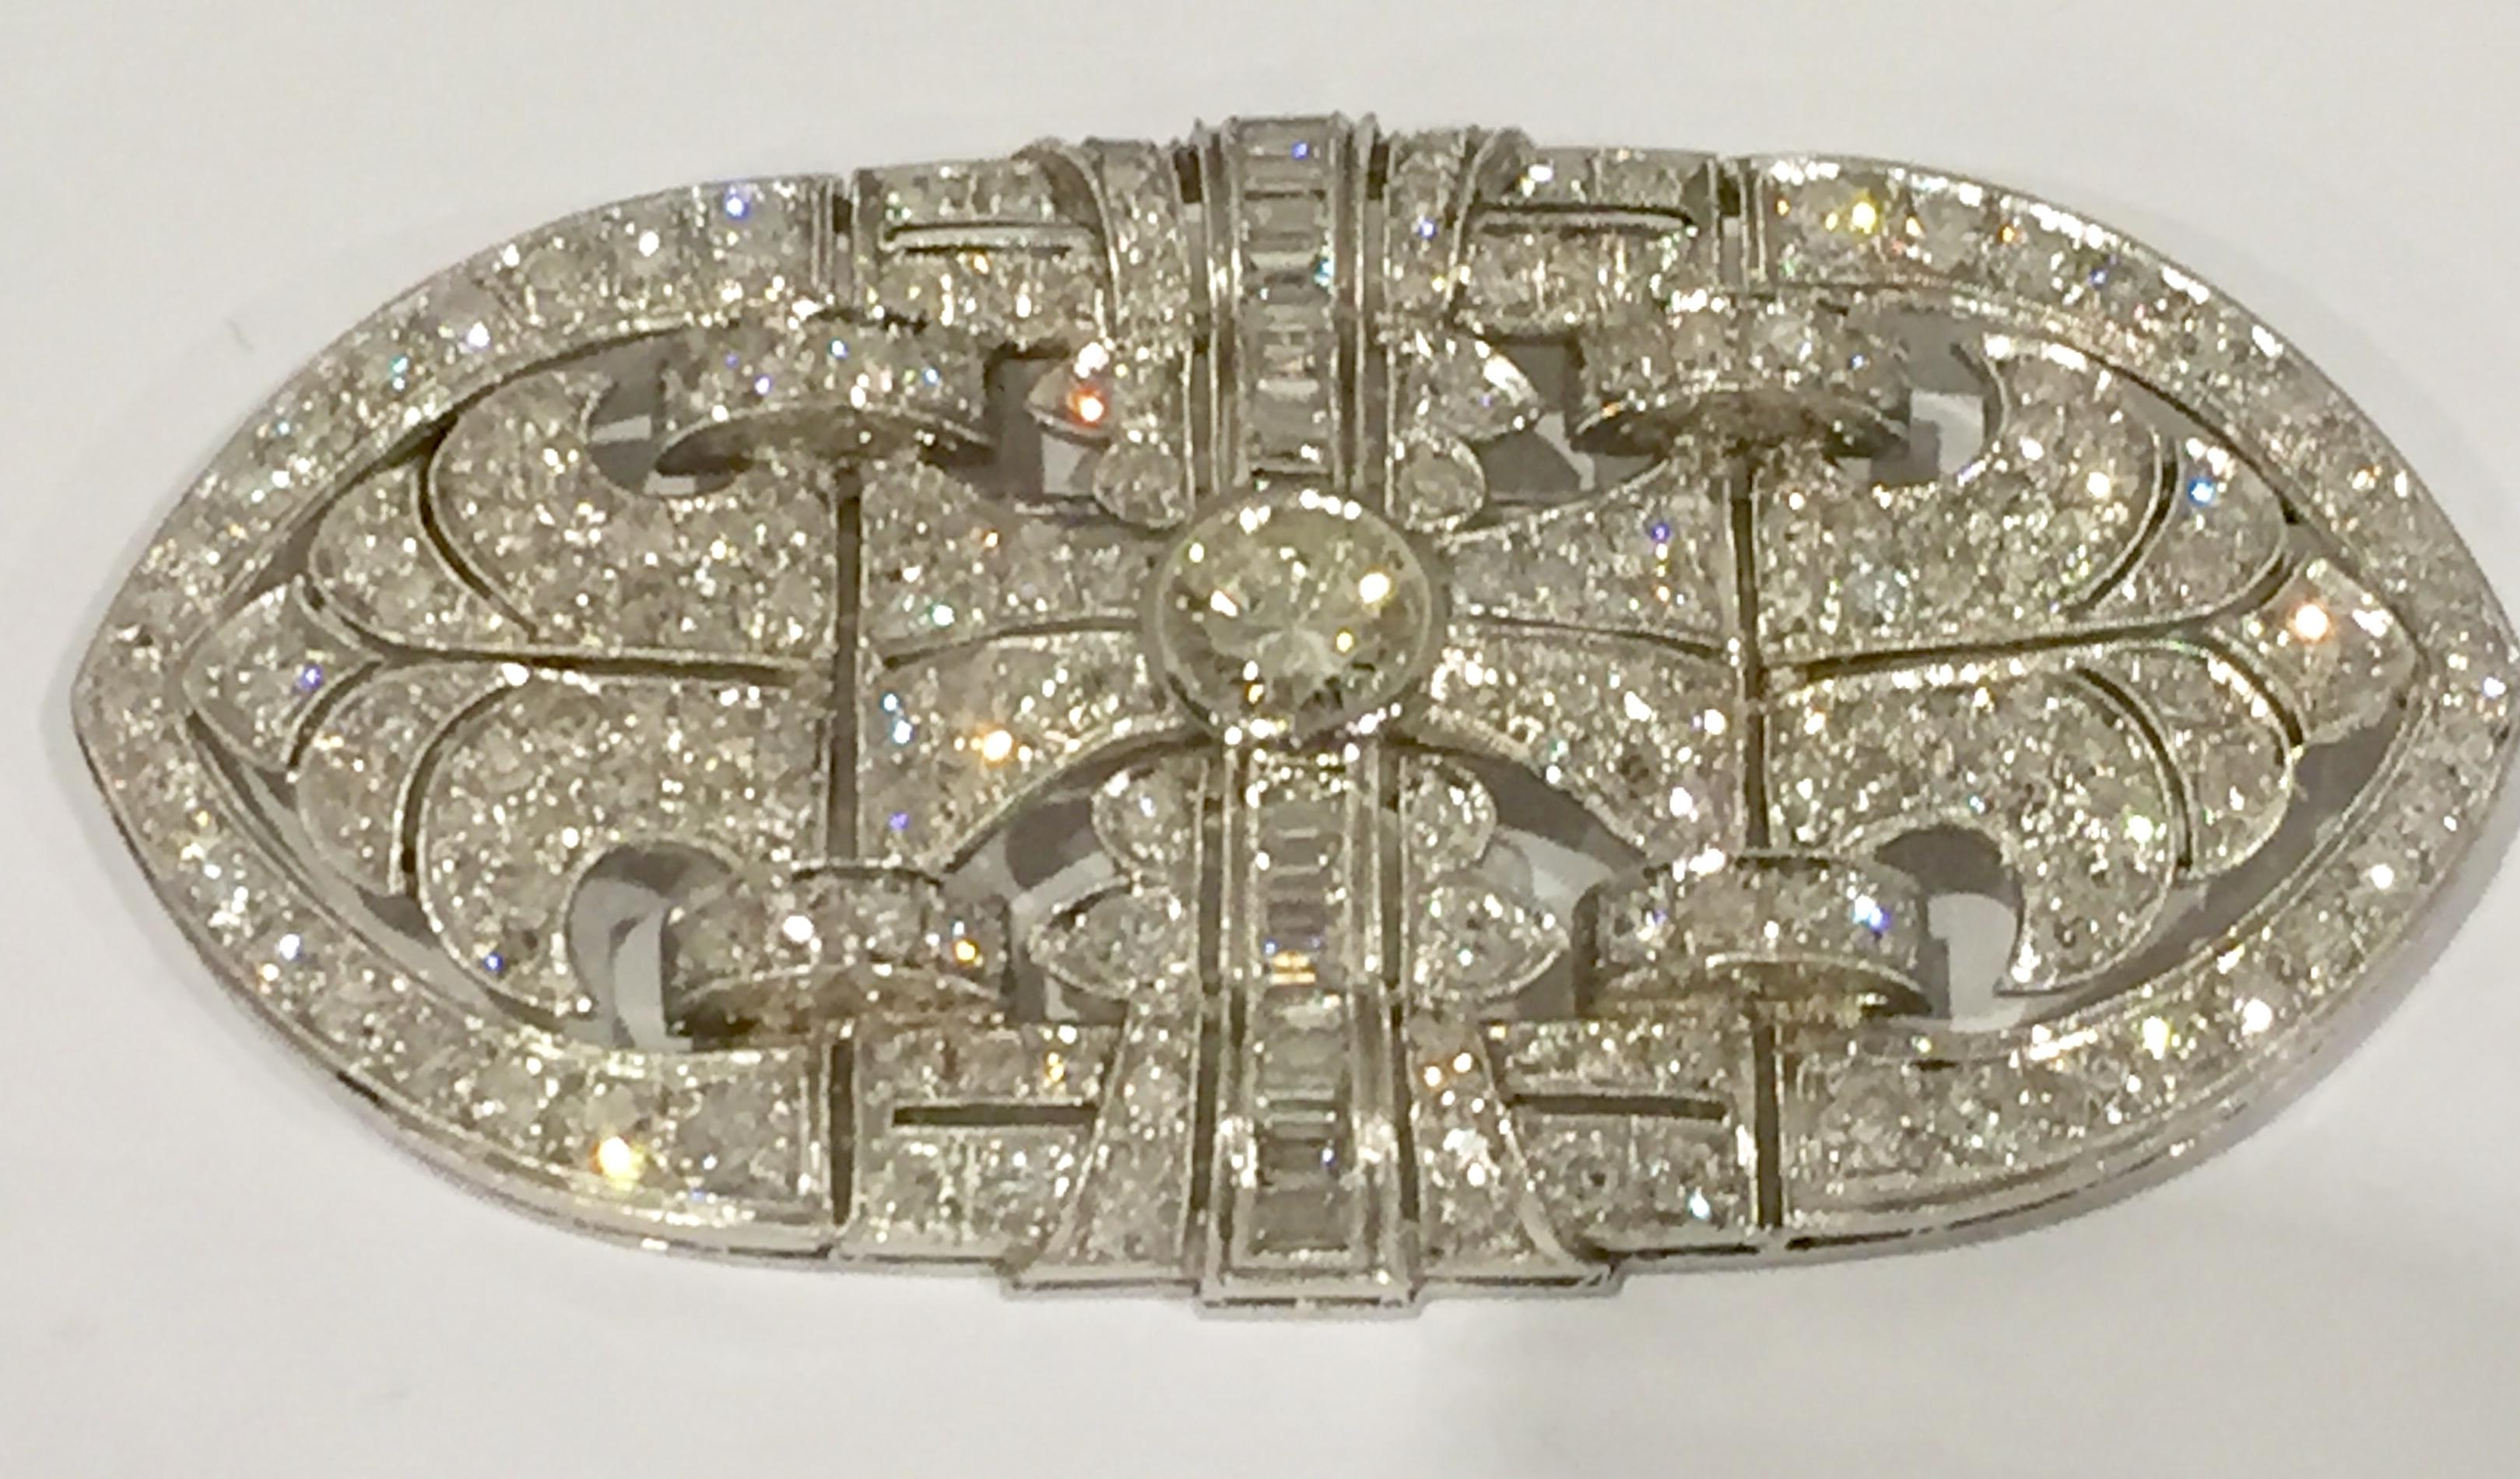 Stunning Art Déco plaque brooch in Paltinum. Centre stone weighing 1.60 ct, J color, si clarity, flanked by 18 Diamond baguettes and 190 brilliant cut diamonds of ca. 10 ct, Wesselton/Top Crystal, vs, si. 